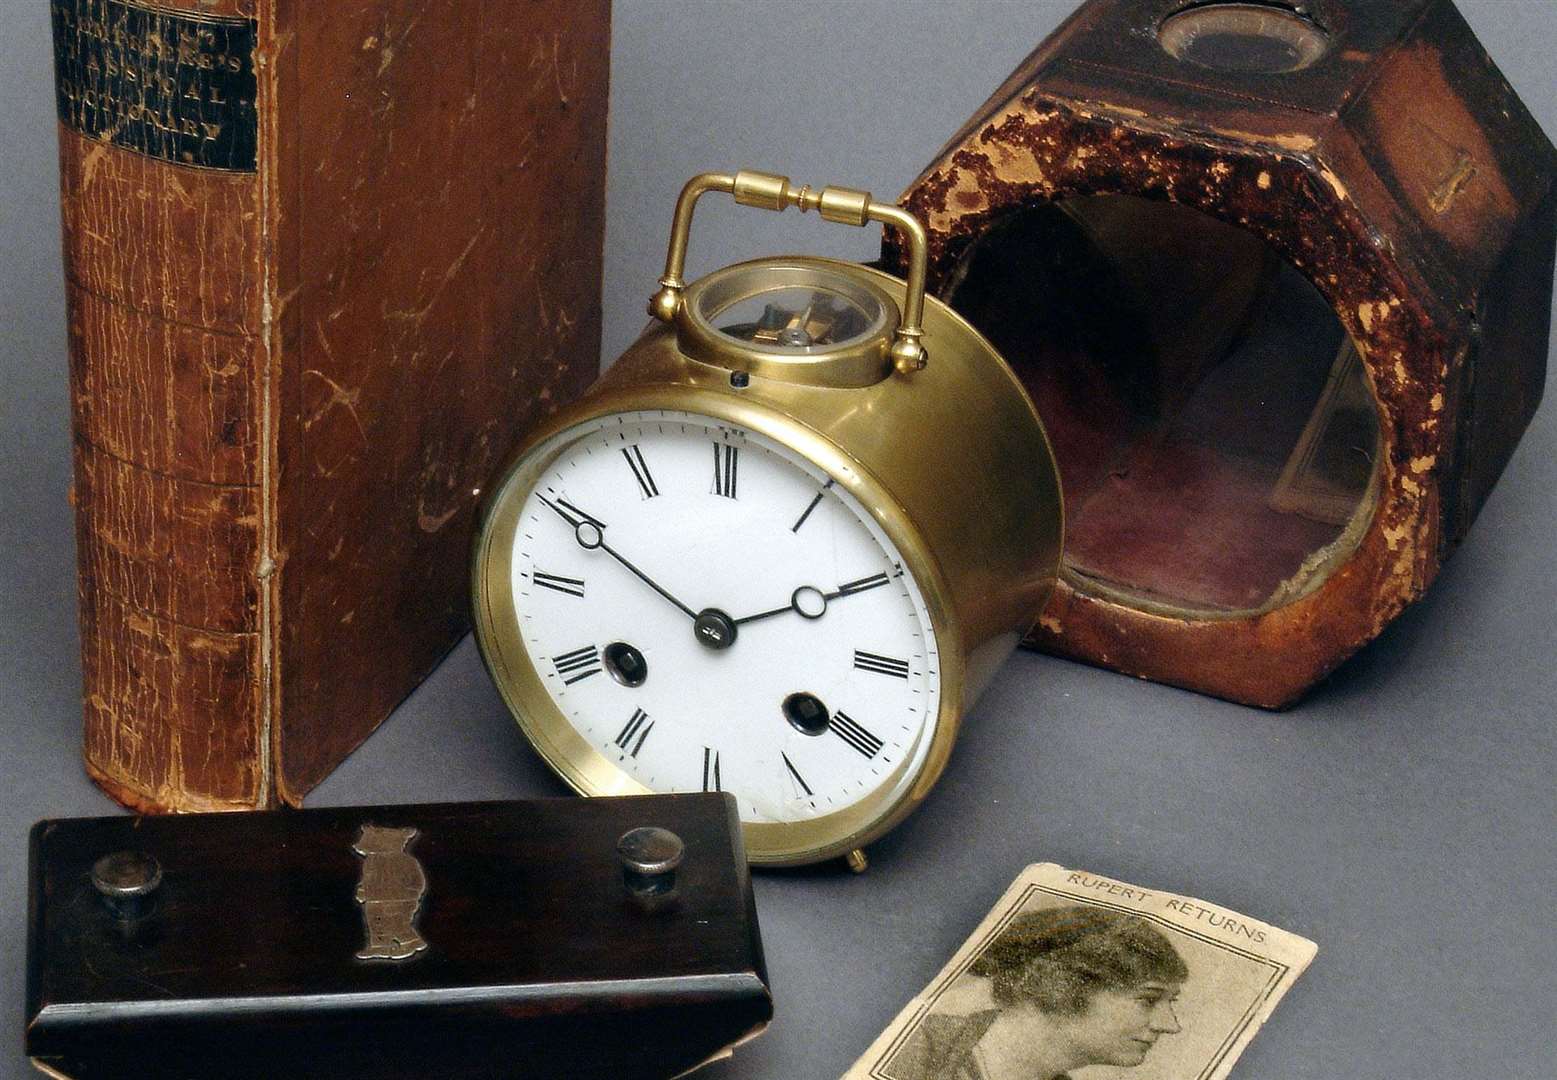 Possessions of Mary Tourtel sold by the Canterbury Auction Galleries in 2005